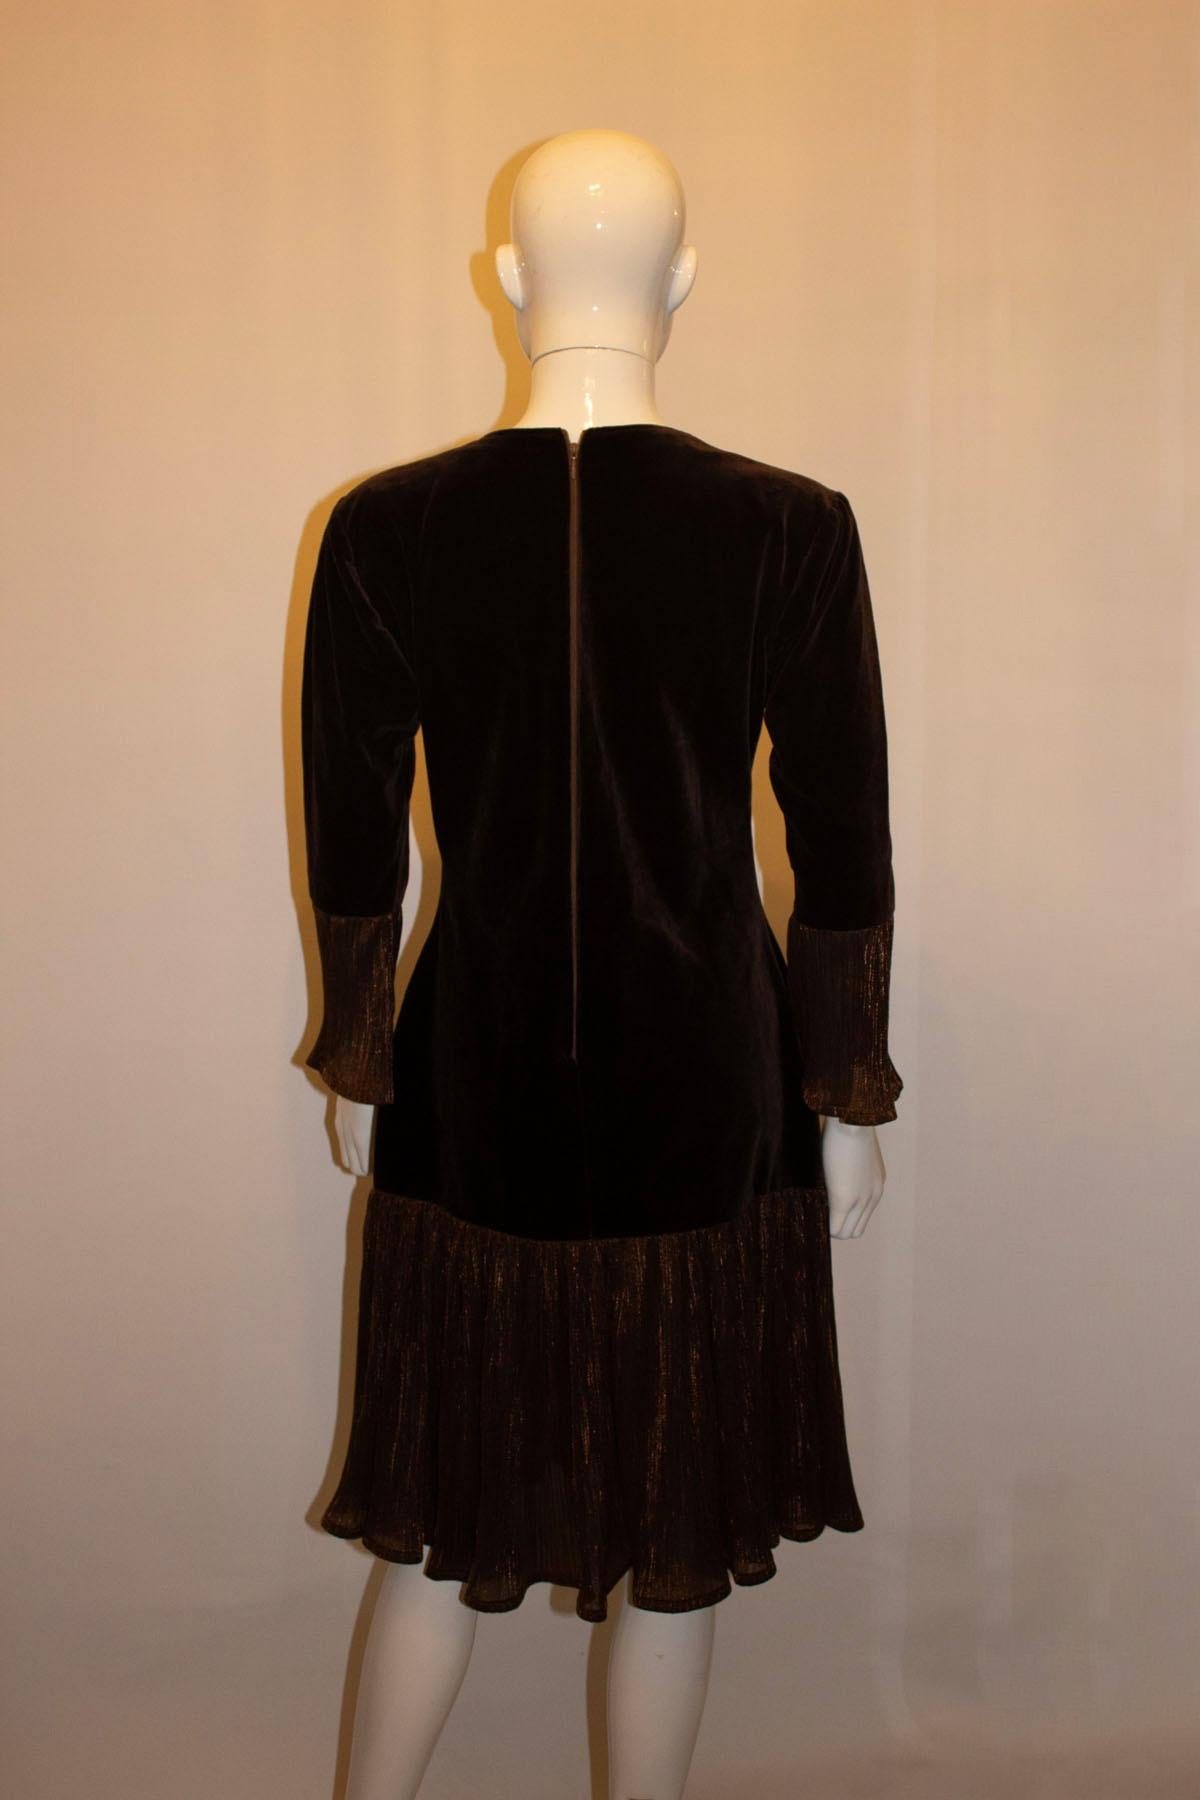 A fun vintage party dress in an attractive brown velvet. The dress has a drop waist, and frill detail on the cuffs and hem.  It is unlined. 
Measurements: Bust 38'', length 41''